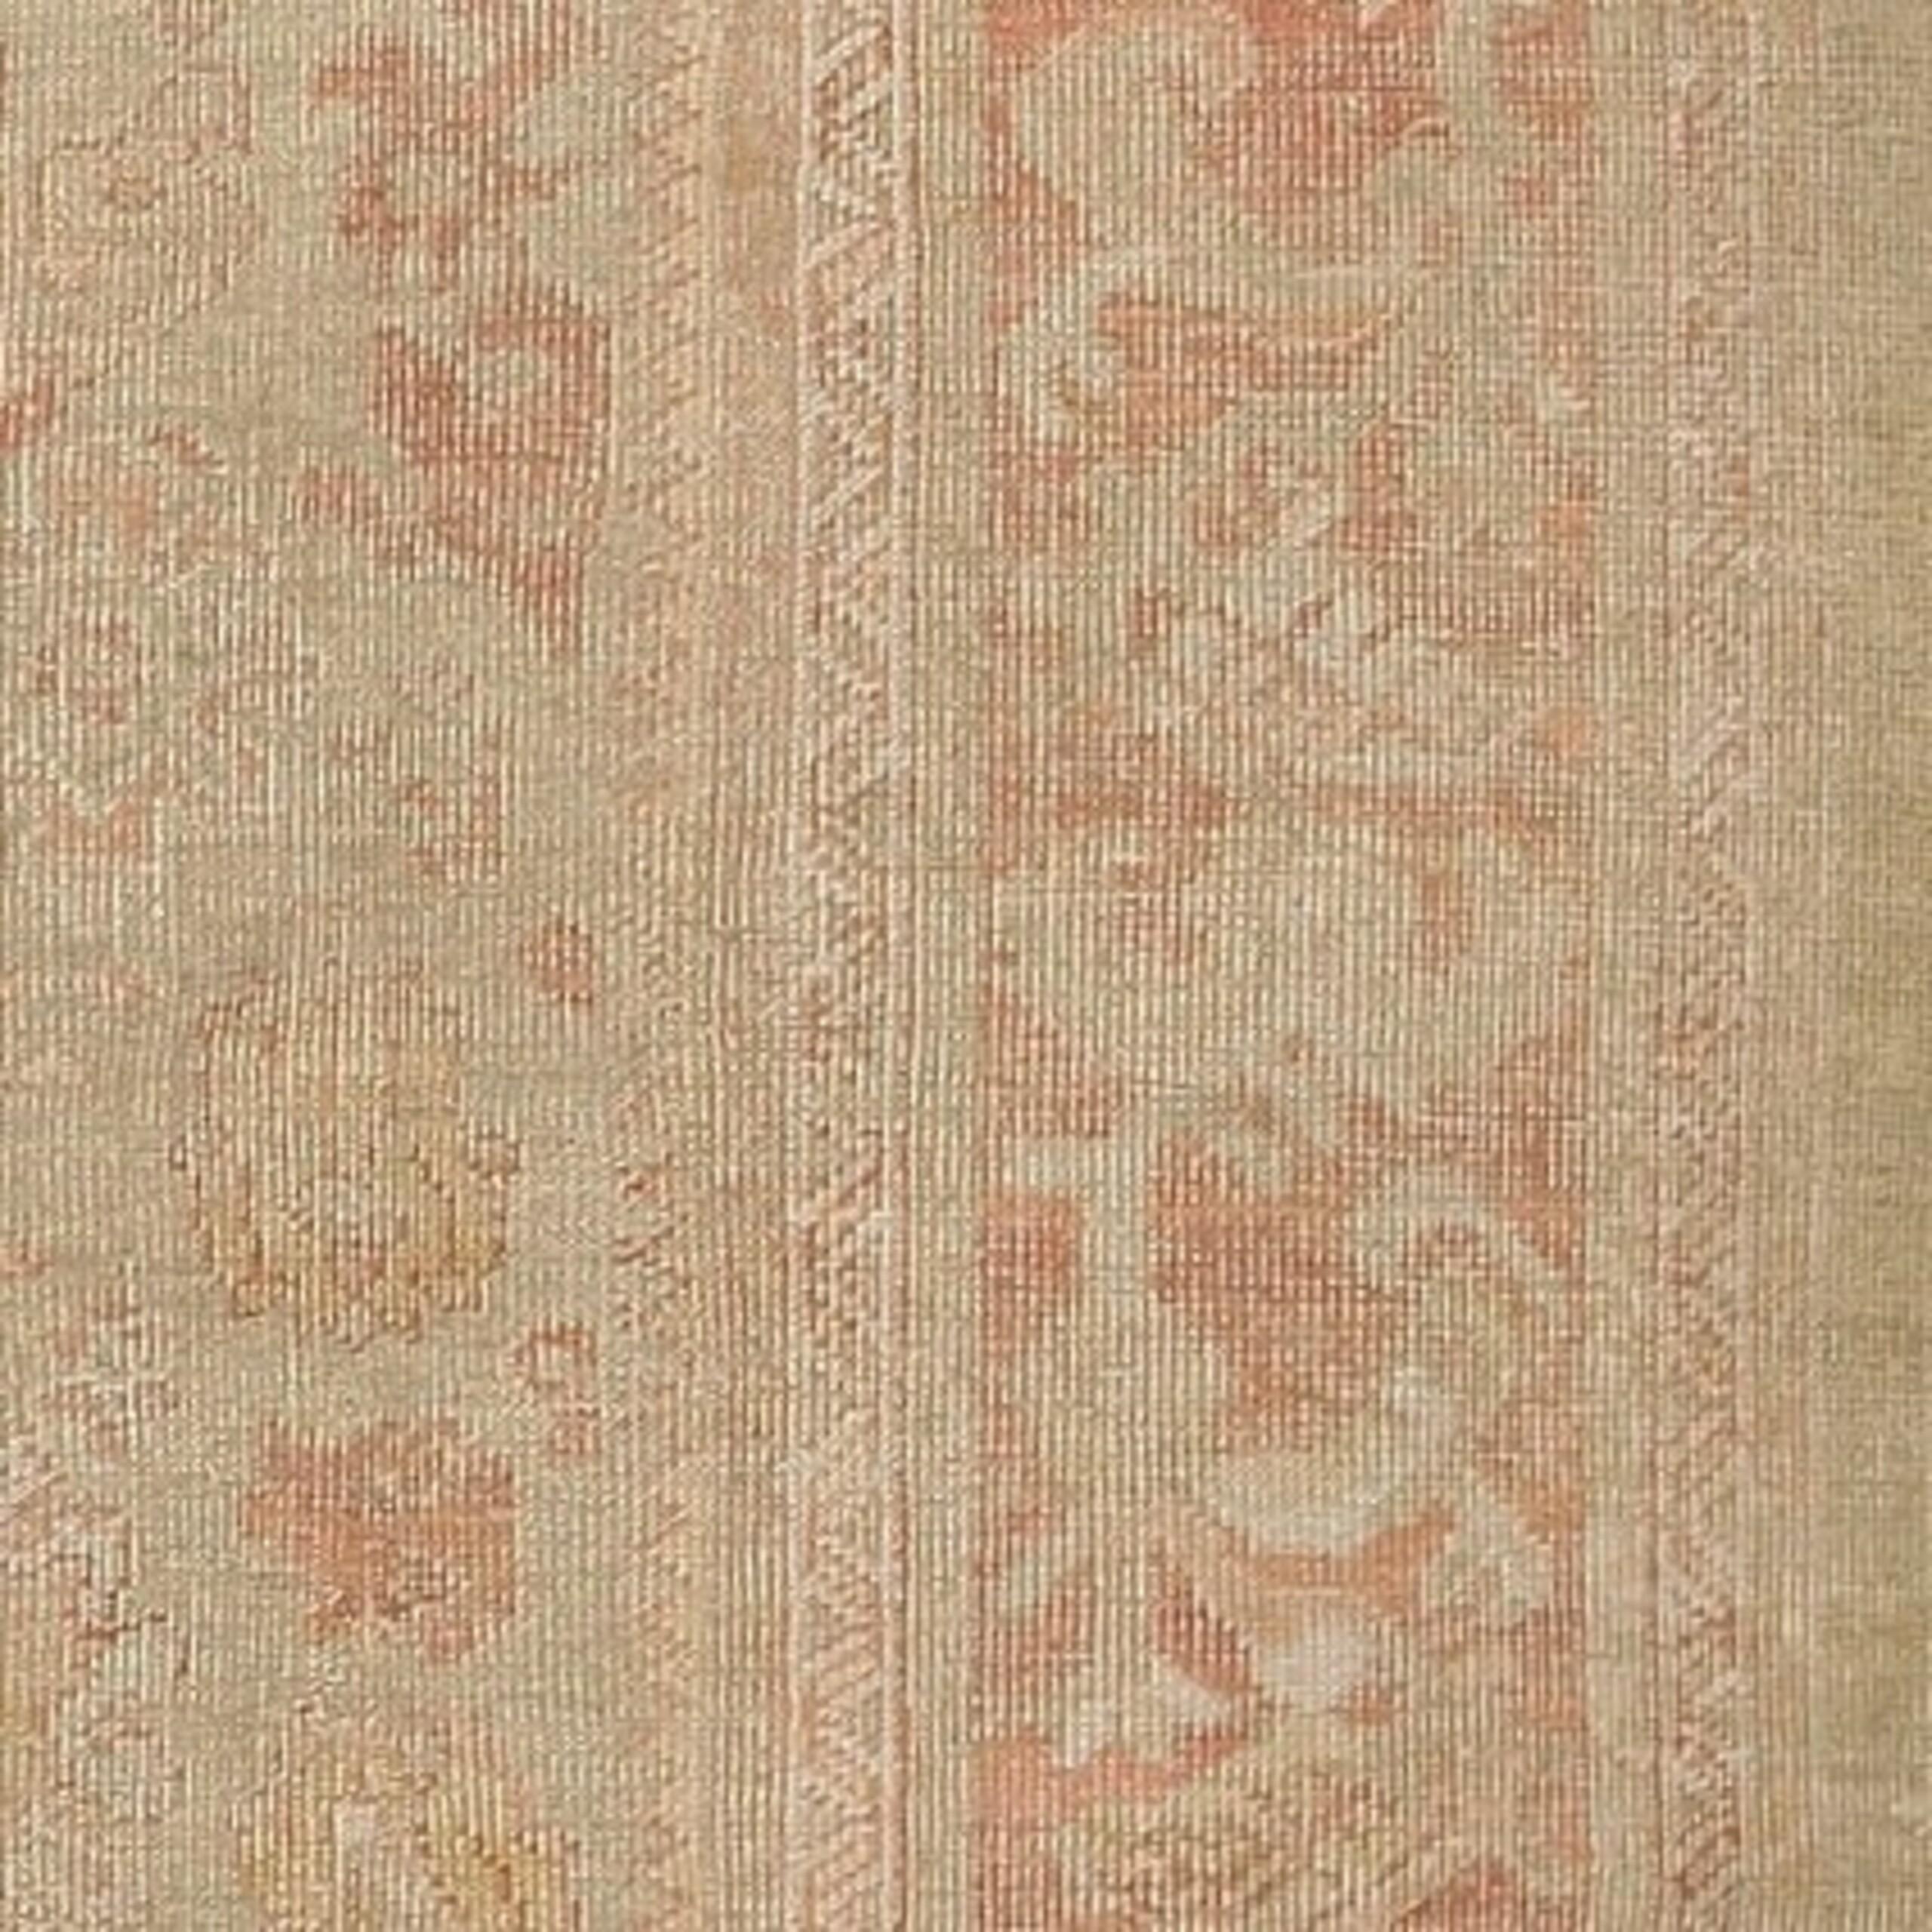 Antique Turkish Oushak Carpet, Country of Origin / Rug Type : Tapis turcs, Circa date : Fin du 19ème siècle. Taille : 10 ft 3 in x 17 ft 3 in (3,12 m x 5,26 m)

